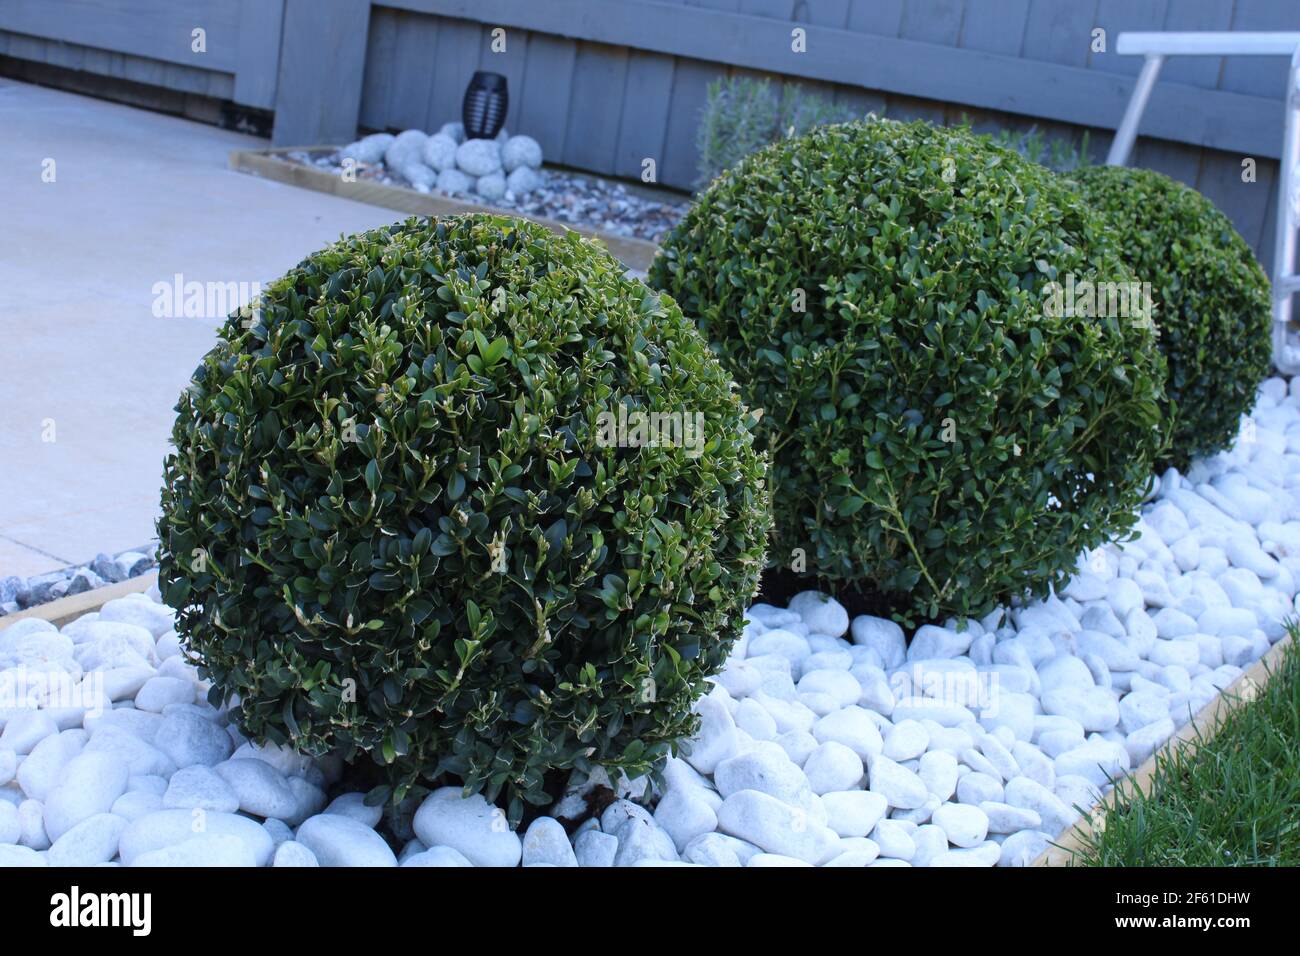 Box topiary balls in white decorative aggregate, low maintenance garden with white pebbles Stock Photo